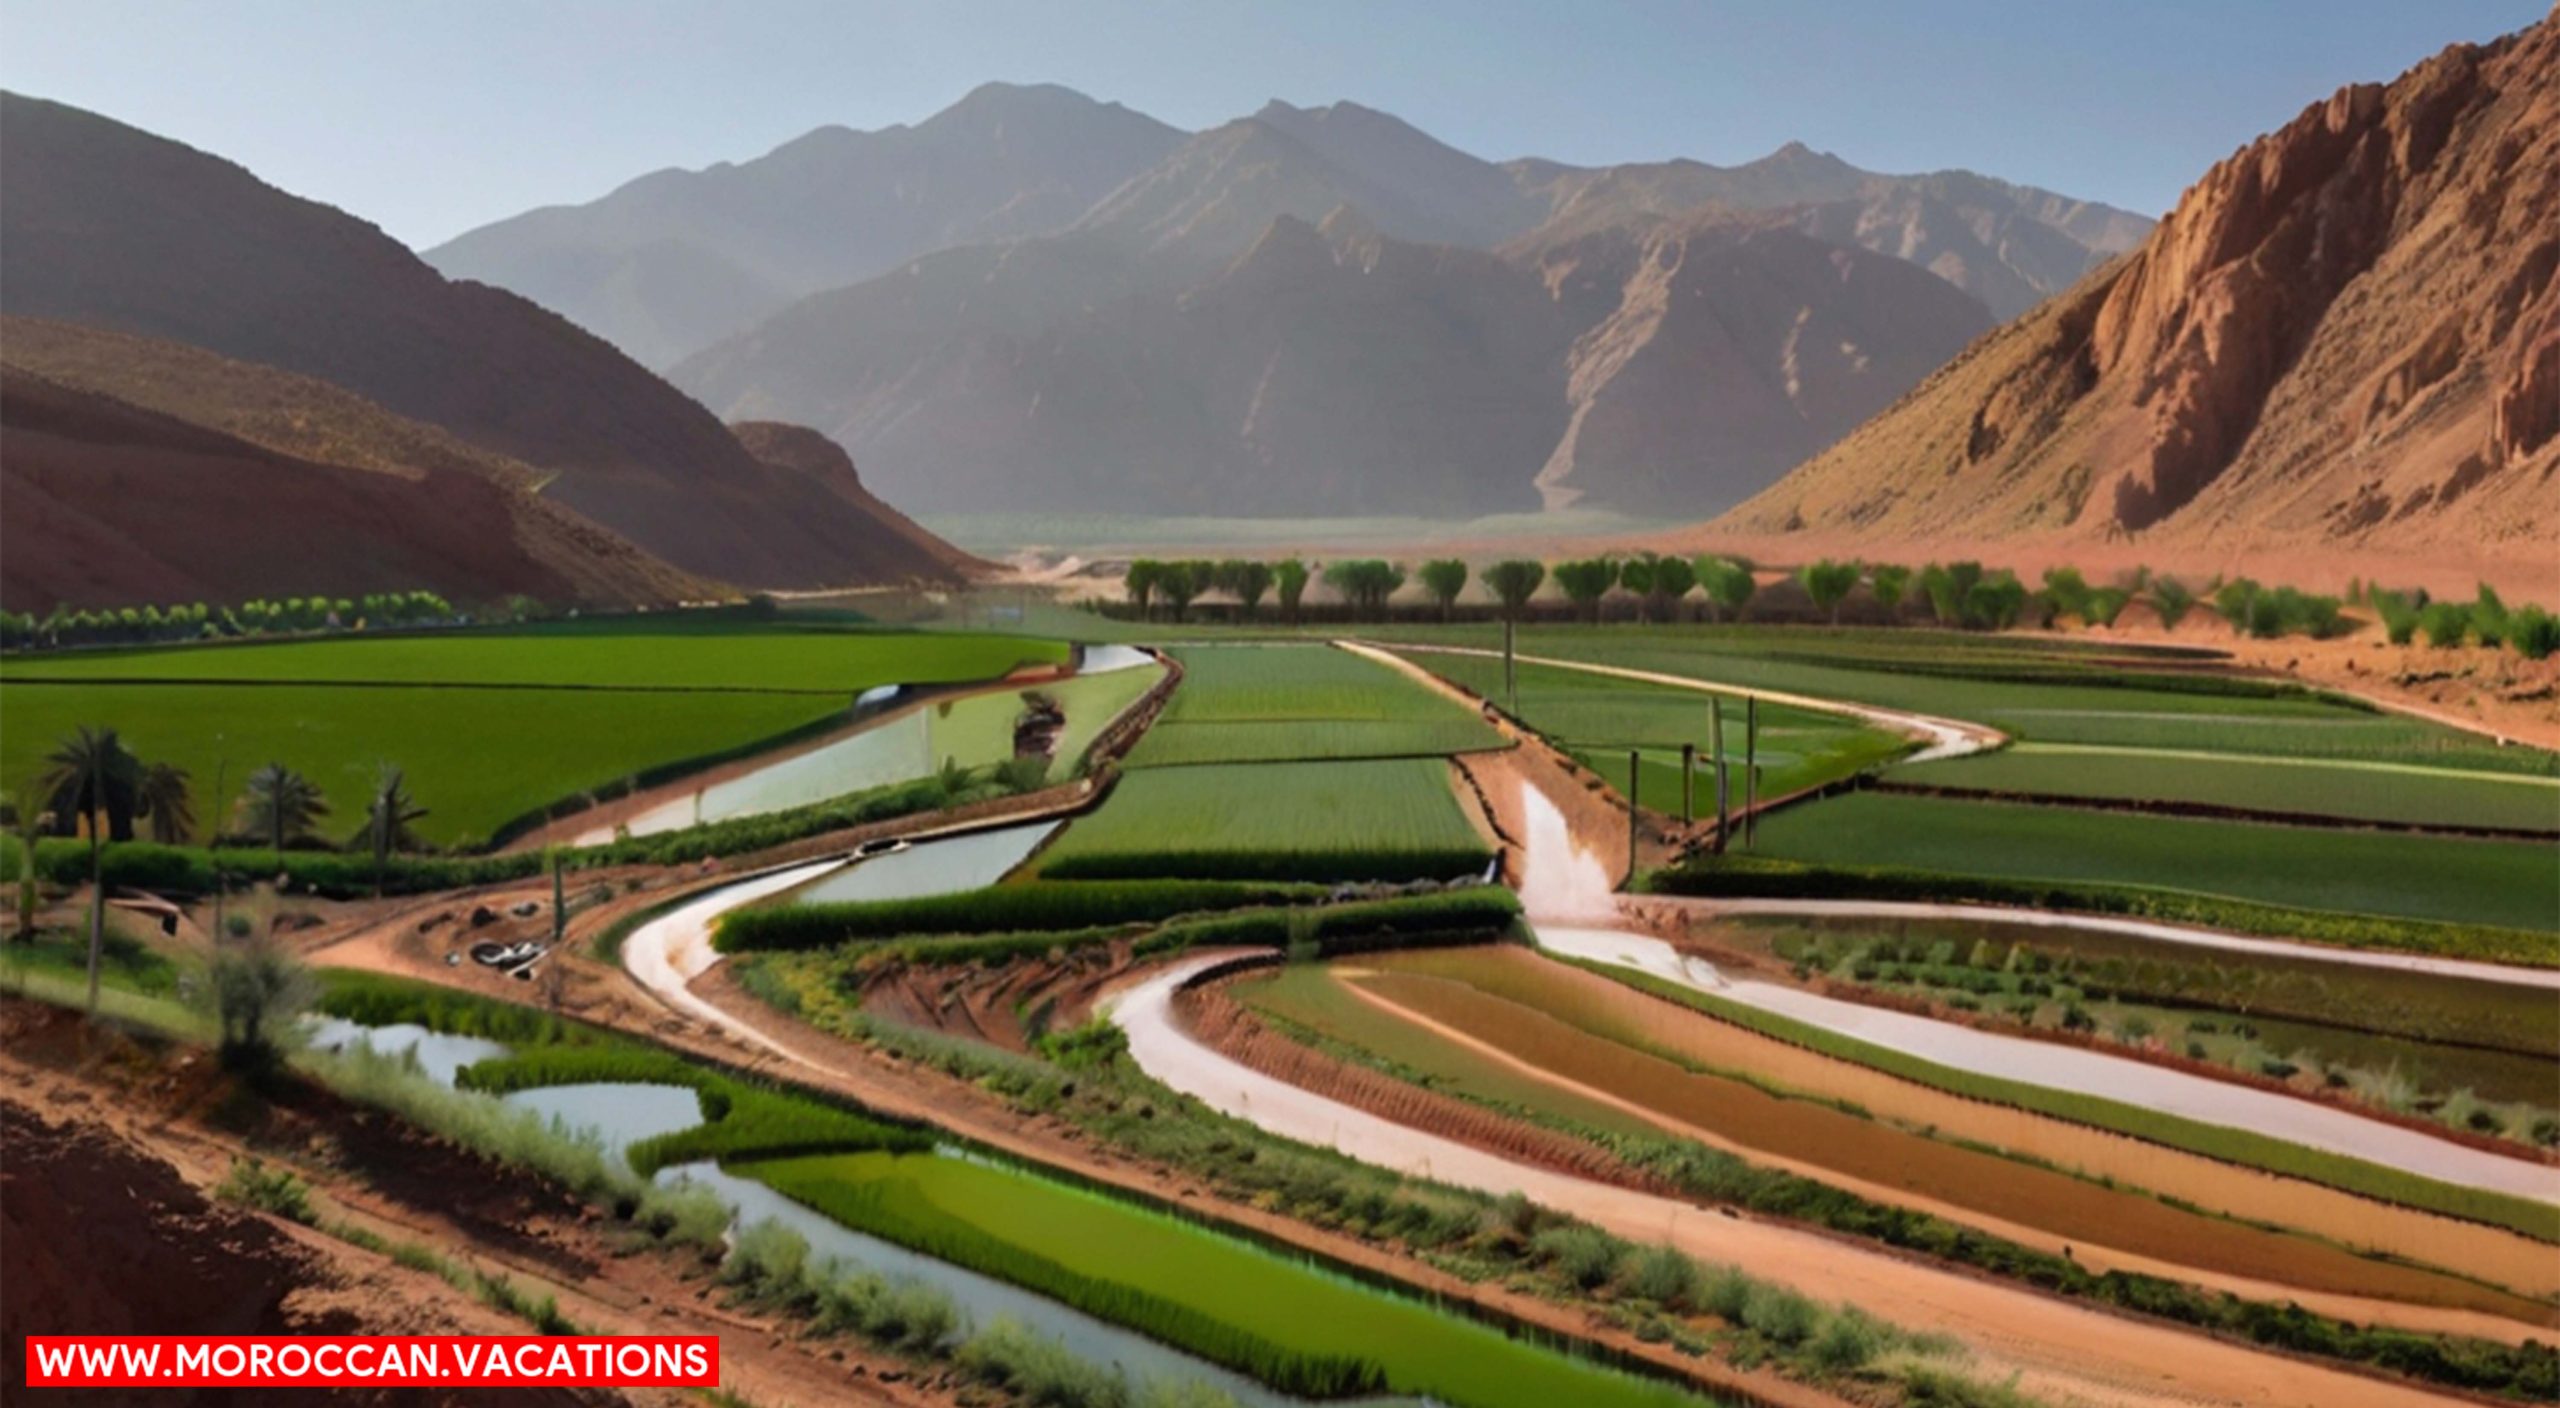 Dades valley surround with rice fields.